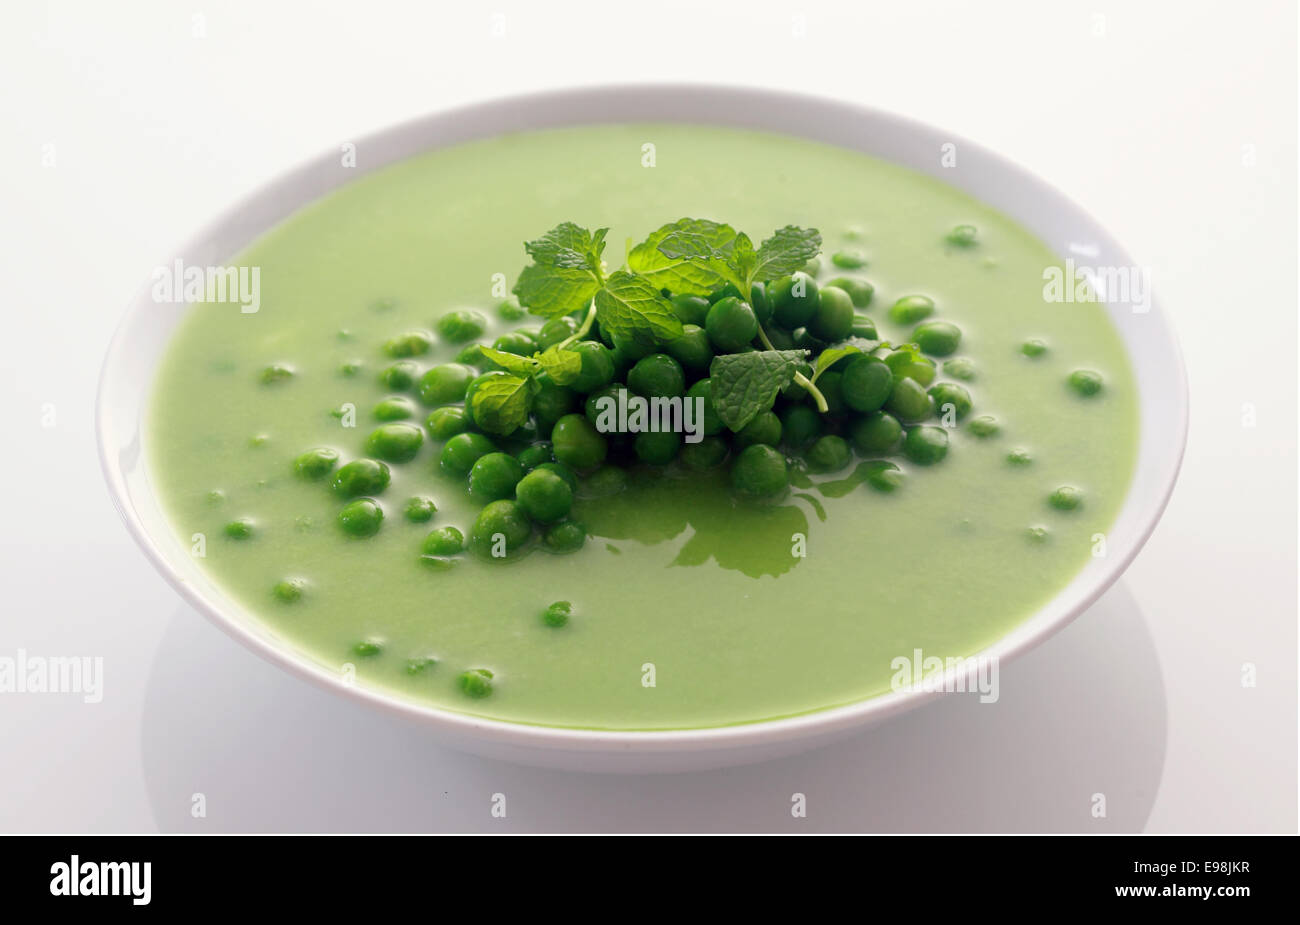 Close up Appetizing Healthy Green Peas Soup on White Bowl Isolated on White Background. Stock Photo